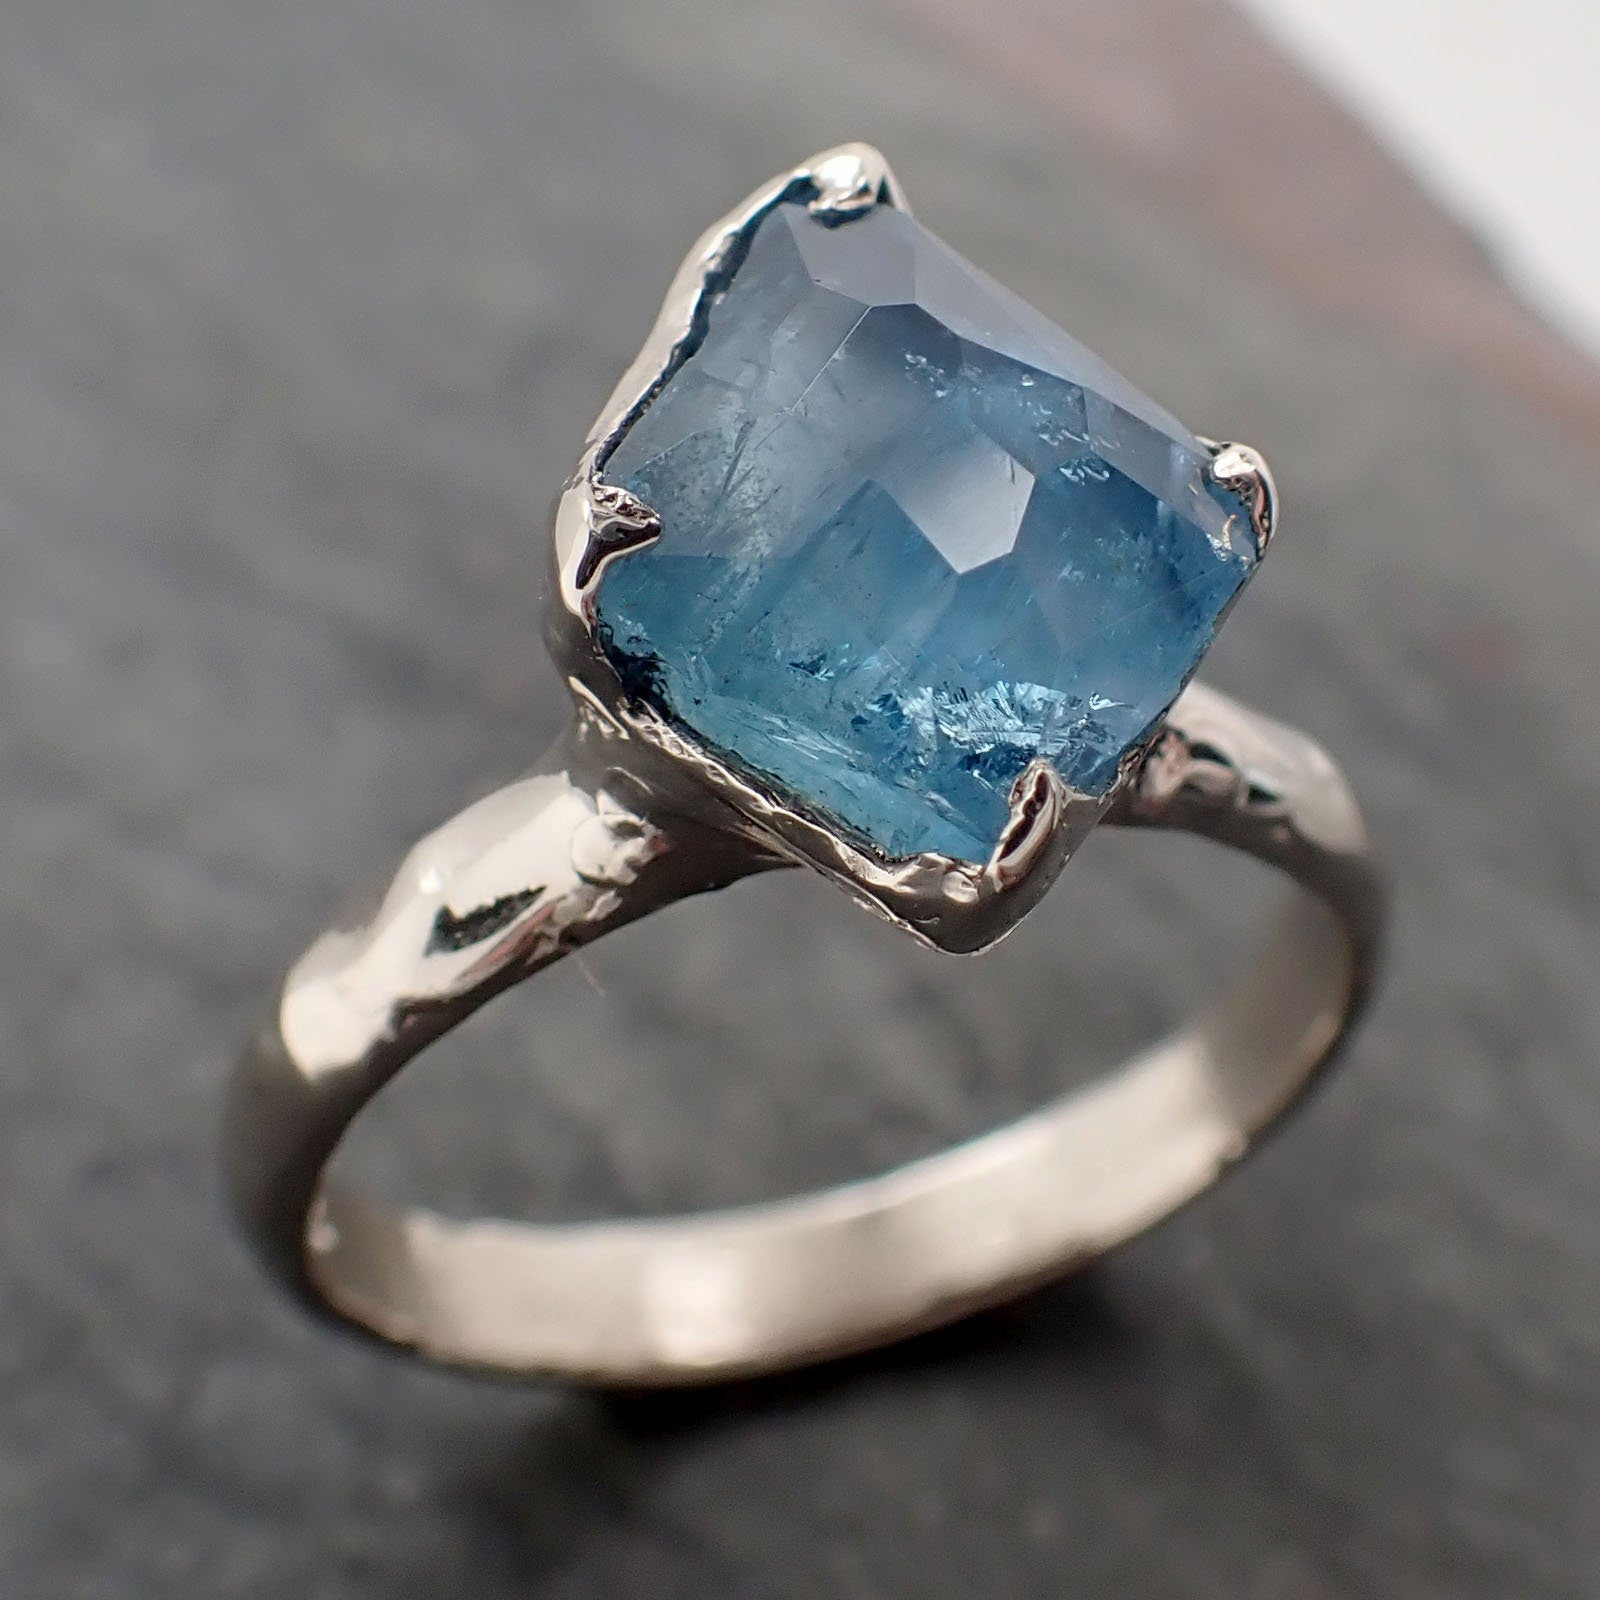 Partially faceted Aquamarine Solitaire Ring 14k gold Custom One Of a Kind Gemstone Ring Bespoke byAngeline 3260